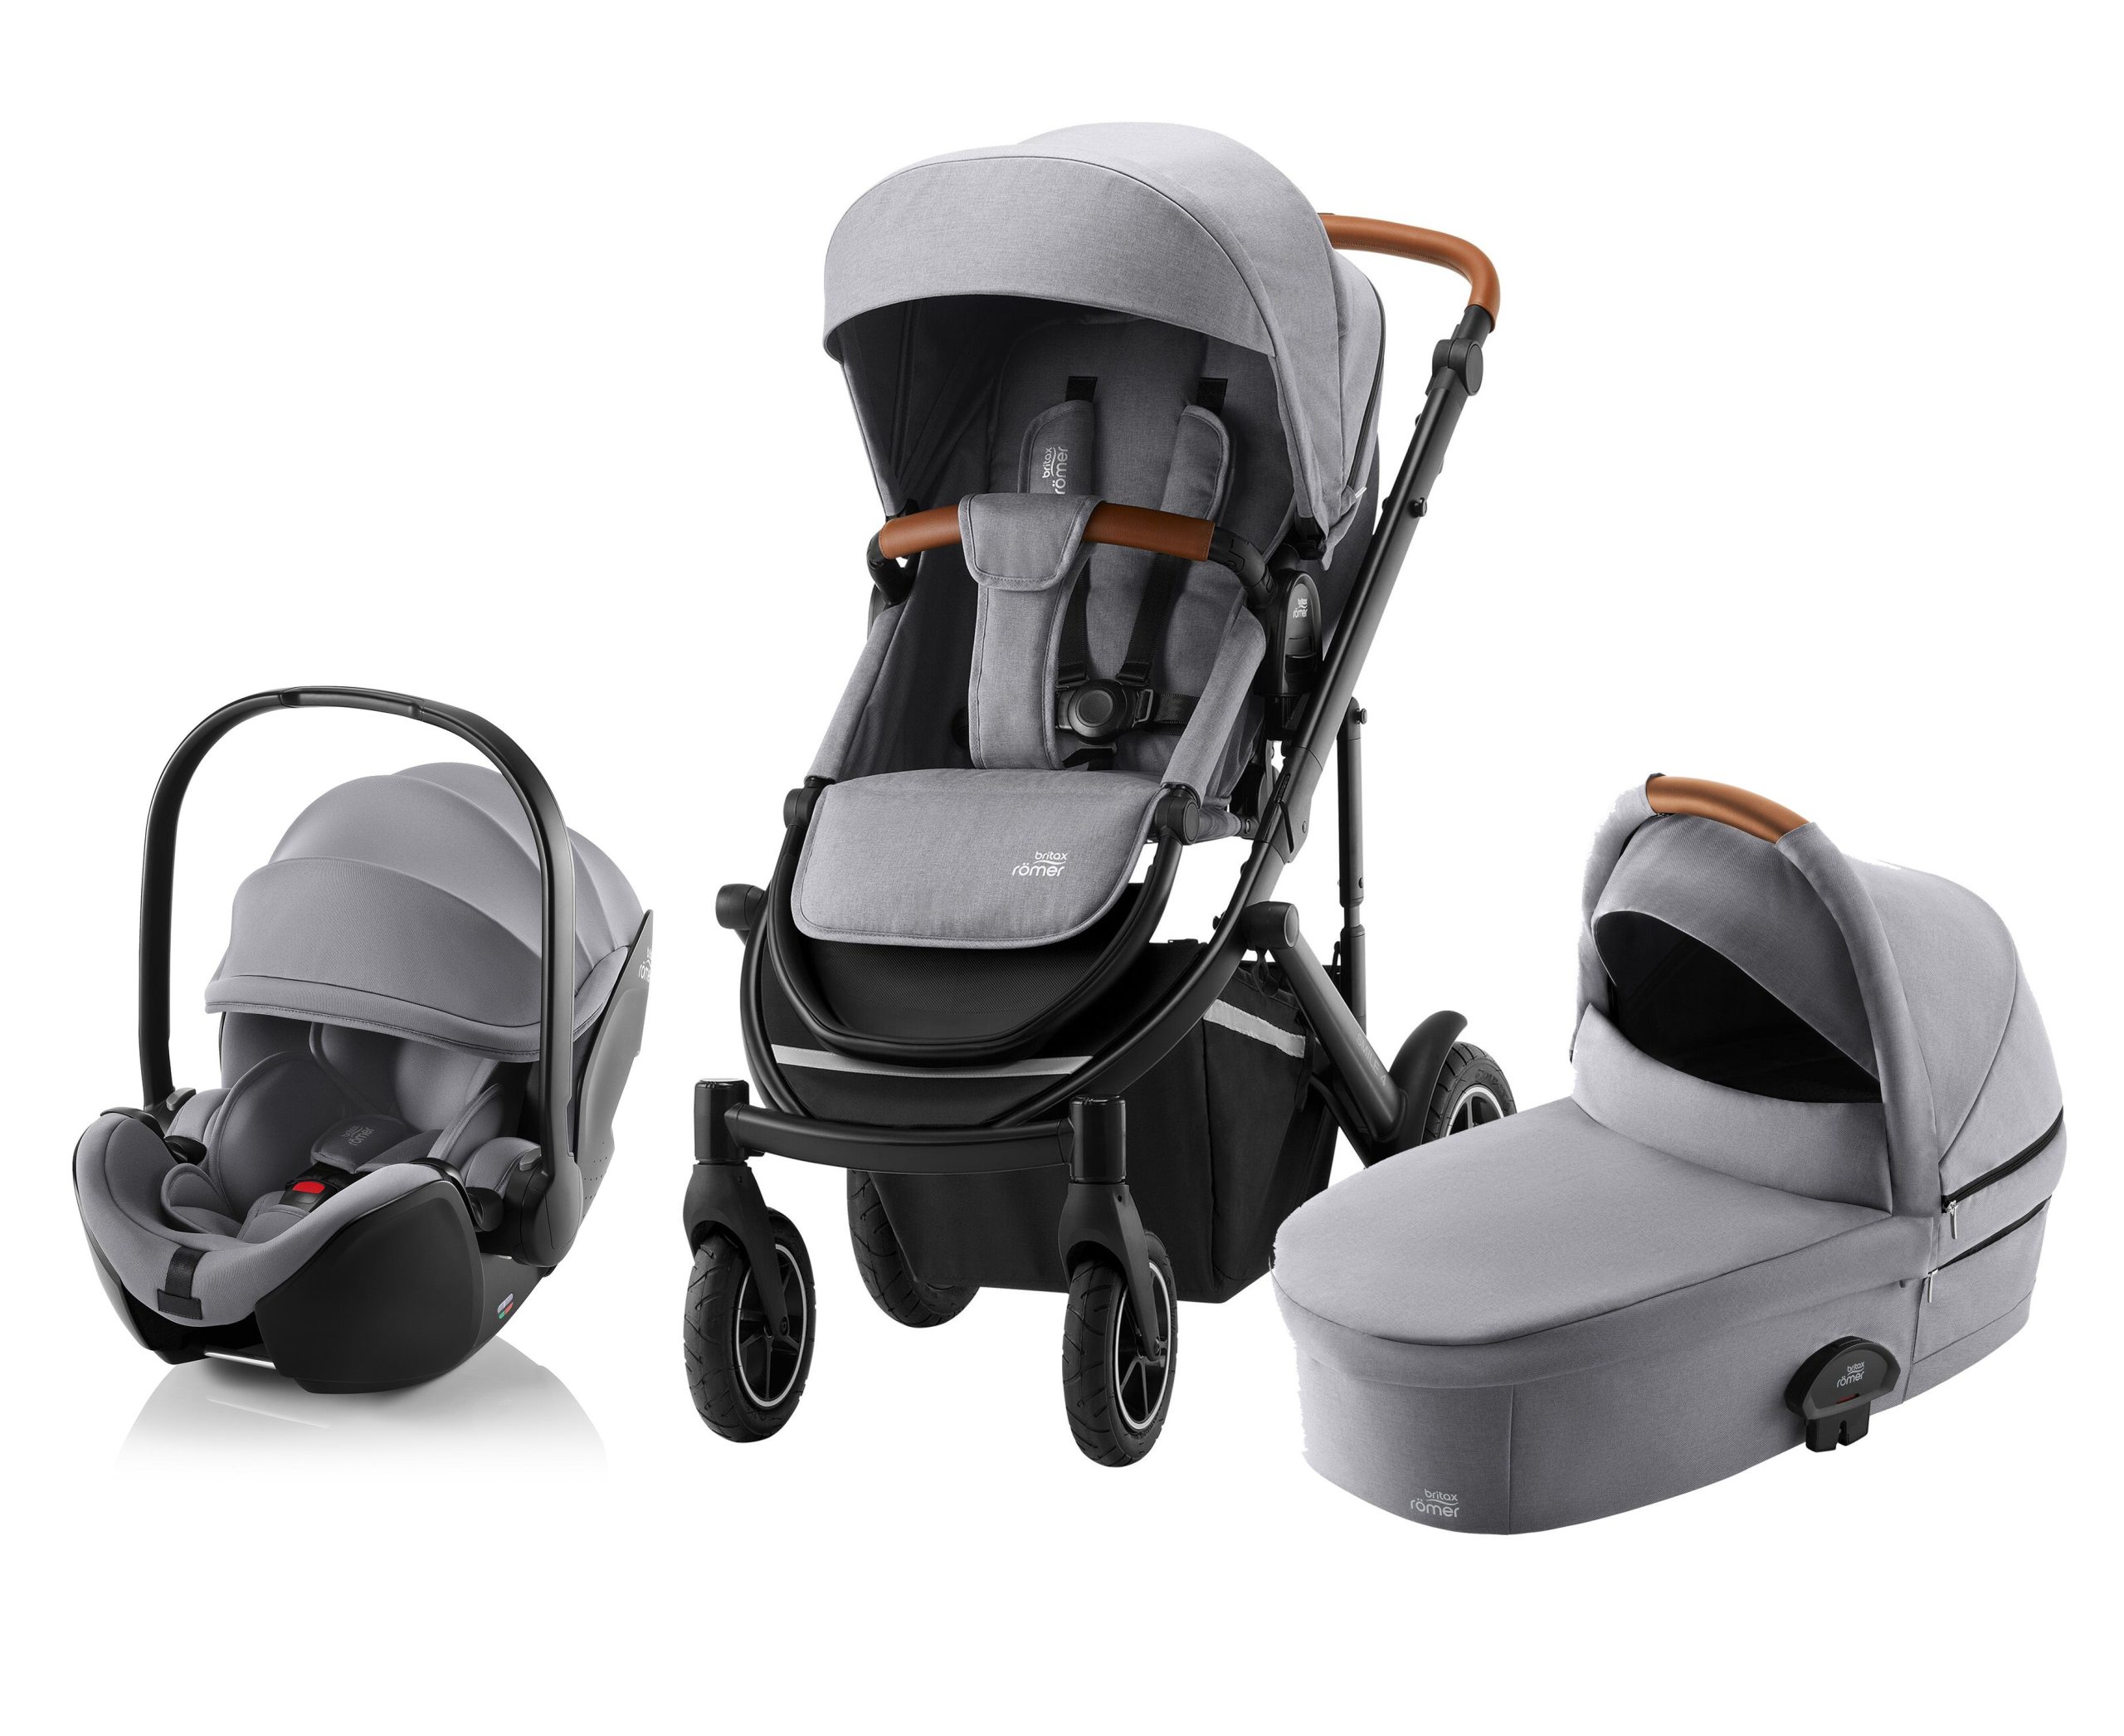 Featured image for “Britax Römer Smile 4 Duovagn inkl. Baby-Safe 5Z, Frost Grey”